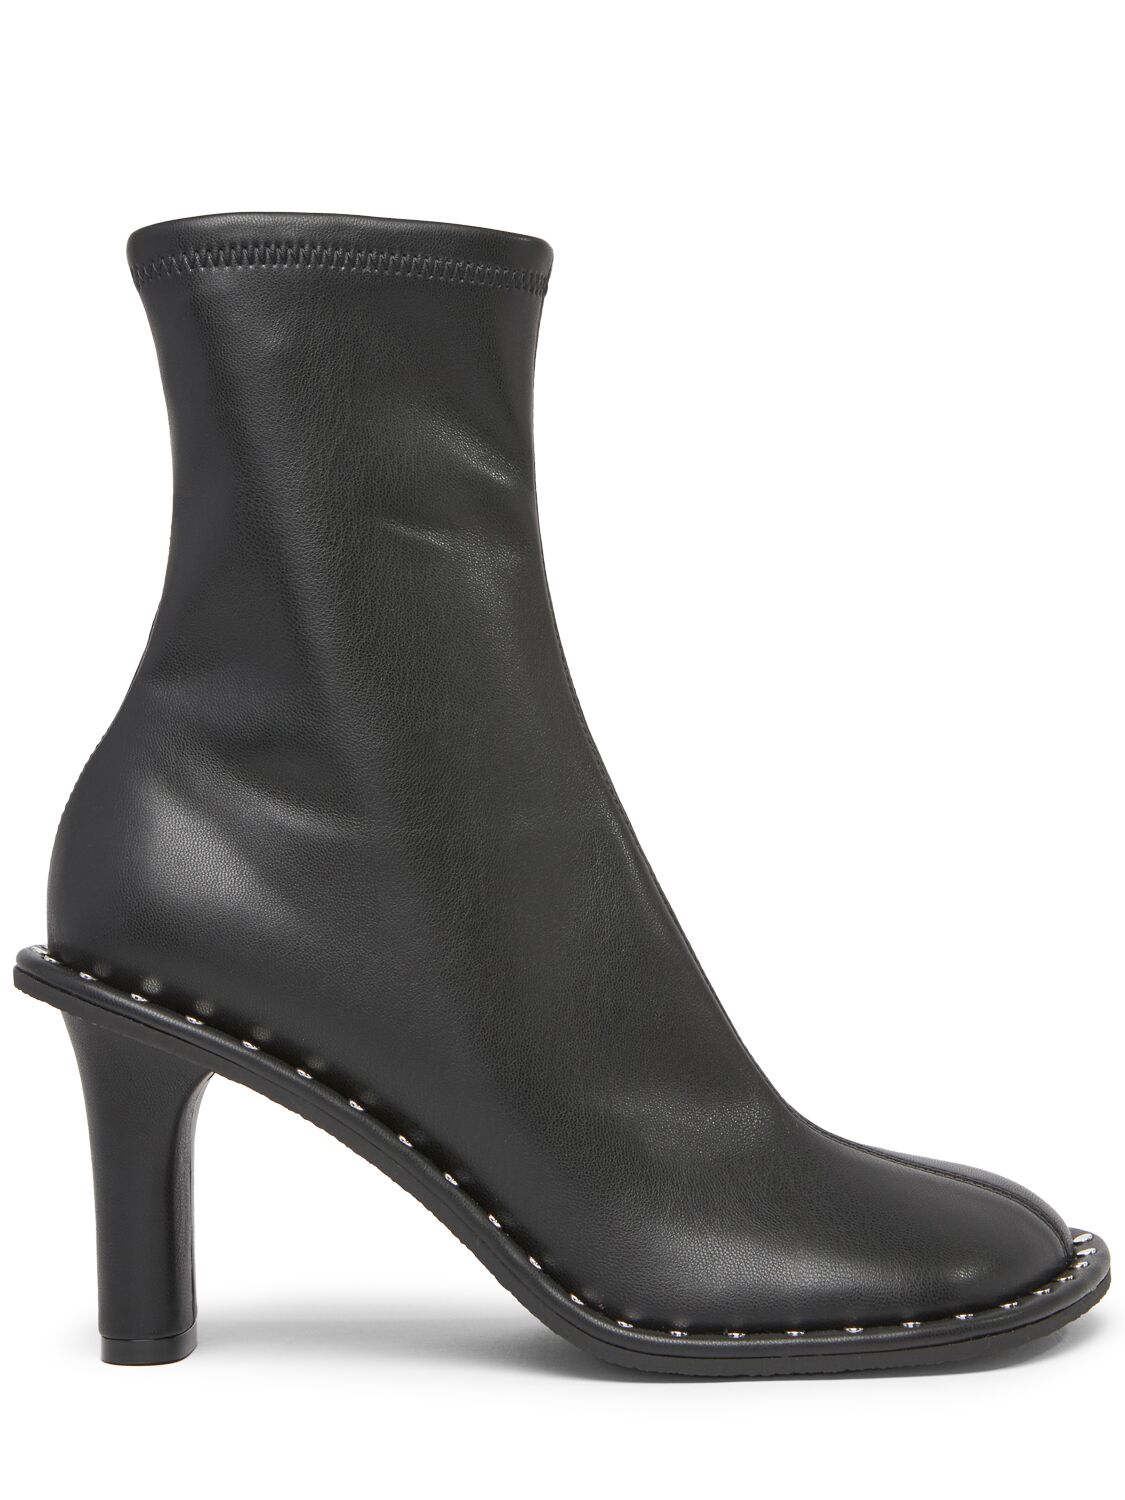 Stella Mccartney 85mm Ryder Faux Leather Ankle Boots In Black